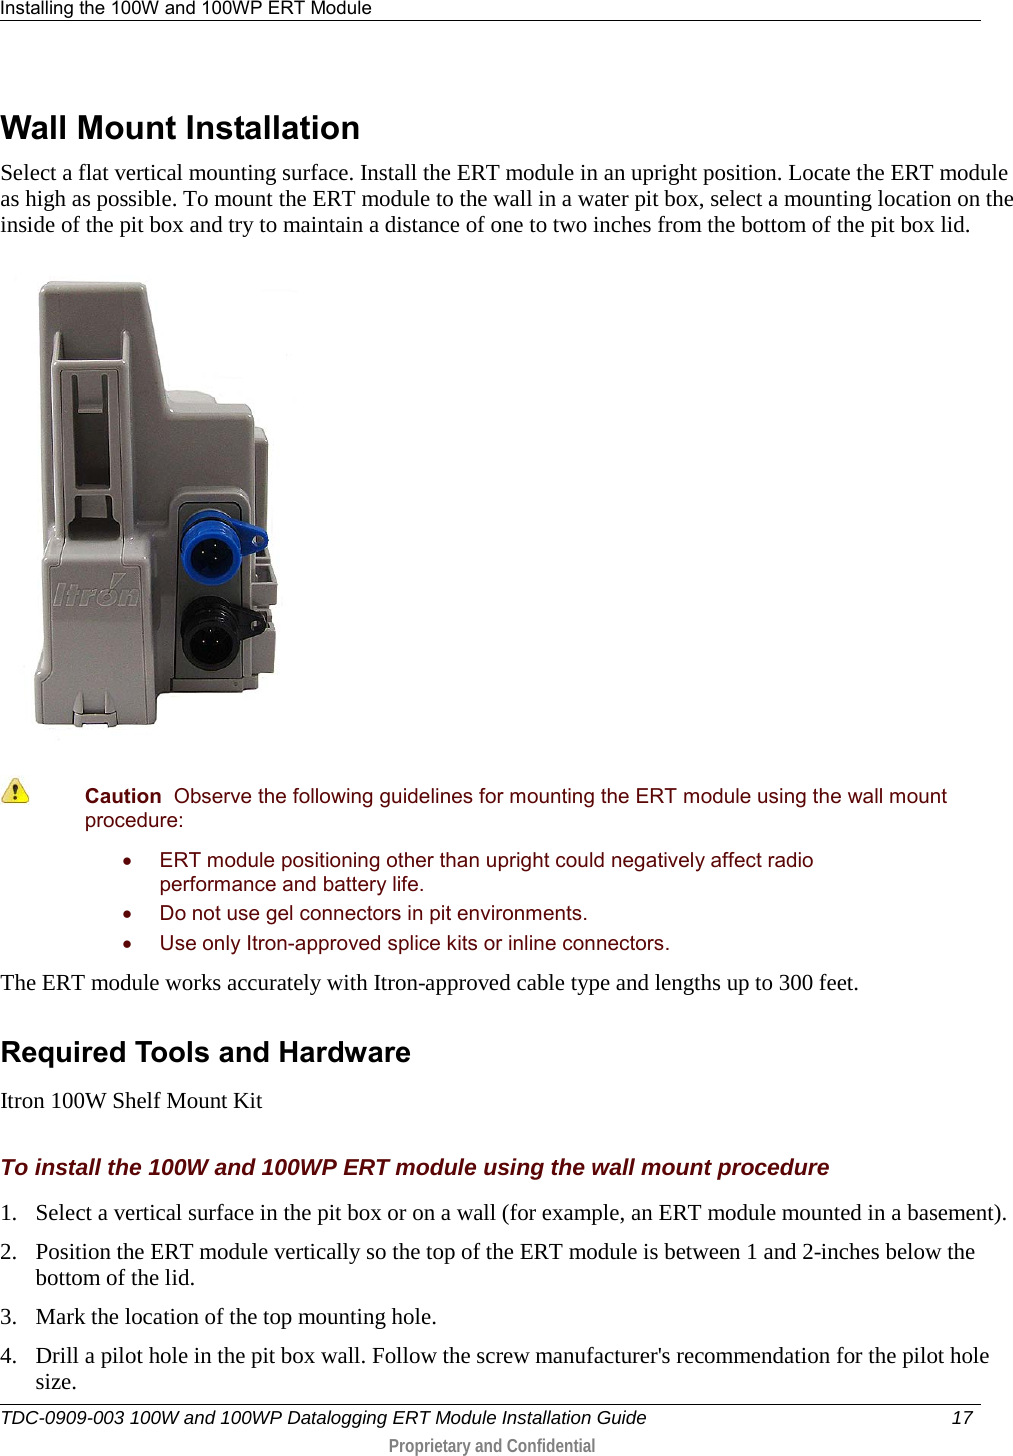 Installing the 100W and 100WP ERT Module   TDC-0909-003 100W and 100WP Datalogging ERT Module Installation Guide 17   Proprietary and Confidential     Wall Mount Installation Select a flat vertical mounting surface. Install the ERT module in an upright position. Locate the ERT module as high as possible. To mount the ERT module to the wall in a water pit box, select a mounting location on the inside of the pit box and try to maintain a distance of one to two inches from the bottom of the pit box lid.    Caution  Observe the following guidelines for mounting the ERT module using the wall mount procedure: • ERT module positioning other than upright could negatively affect radio performance and battery life. • Do not use gel connectors in pit environments. • Use only Itron-approved splice kits or inline connectors.  The ERT module works accurately with Itron-approved cable type and lengths up to 300 feet.  Required Tools and Hardware Itron 100W Shelf Mount Kit  To install the 100W and 100WP ERT module using the wall mount procedure 1. Select a vertical surface in the pit box or on a wall (for example, an ERT module mounted in a basement). 2. Position the ERT module vertically so the top of the ERT module is between 1 and 2-inches below the bottom of the lid. 3. Mark the location of the top mounting hole. 4. Drill a pilot hole in the pit box wall. Follow the screw manufacturer&apos;s recommendation for the pilot hole size. 